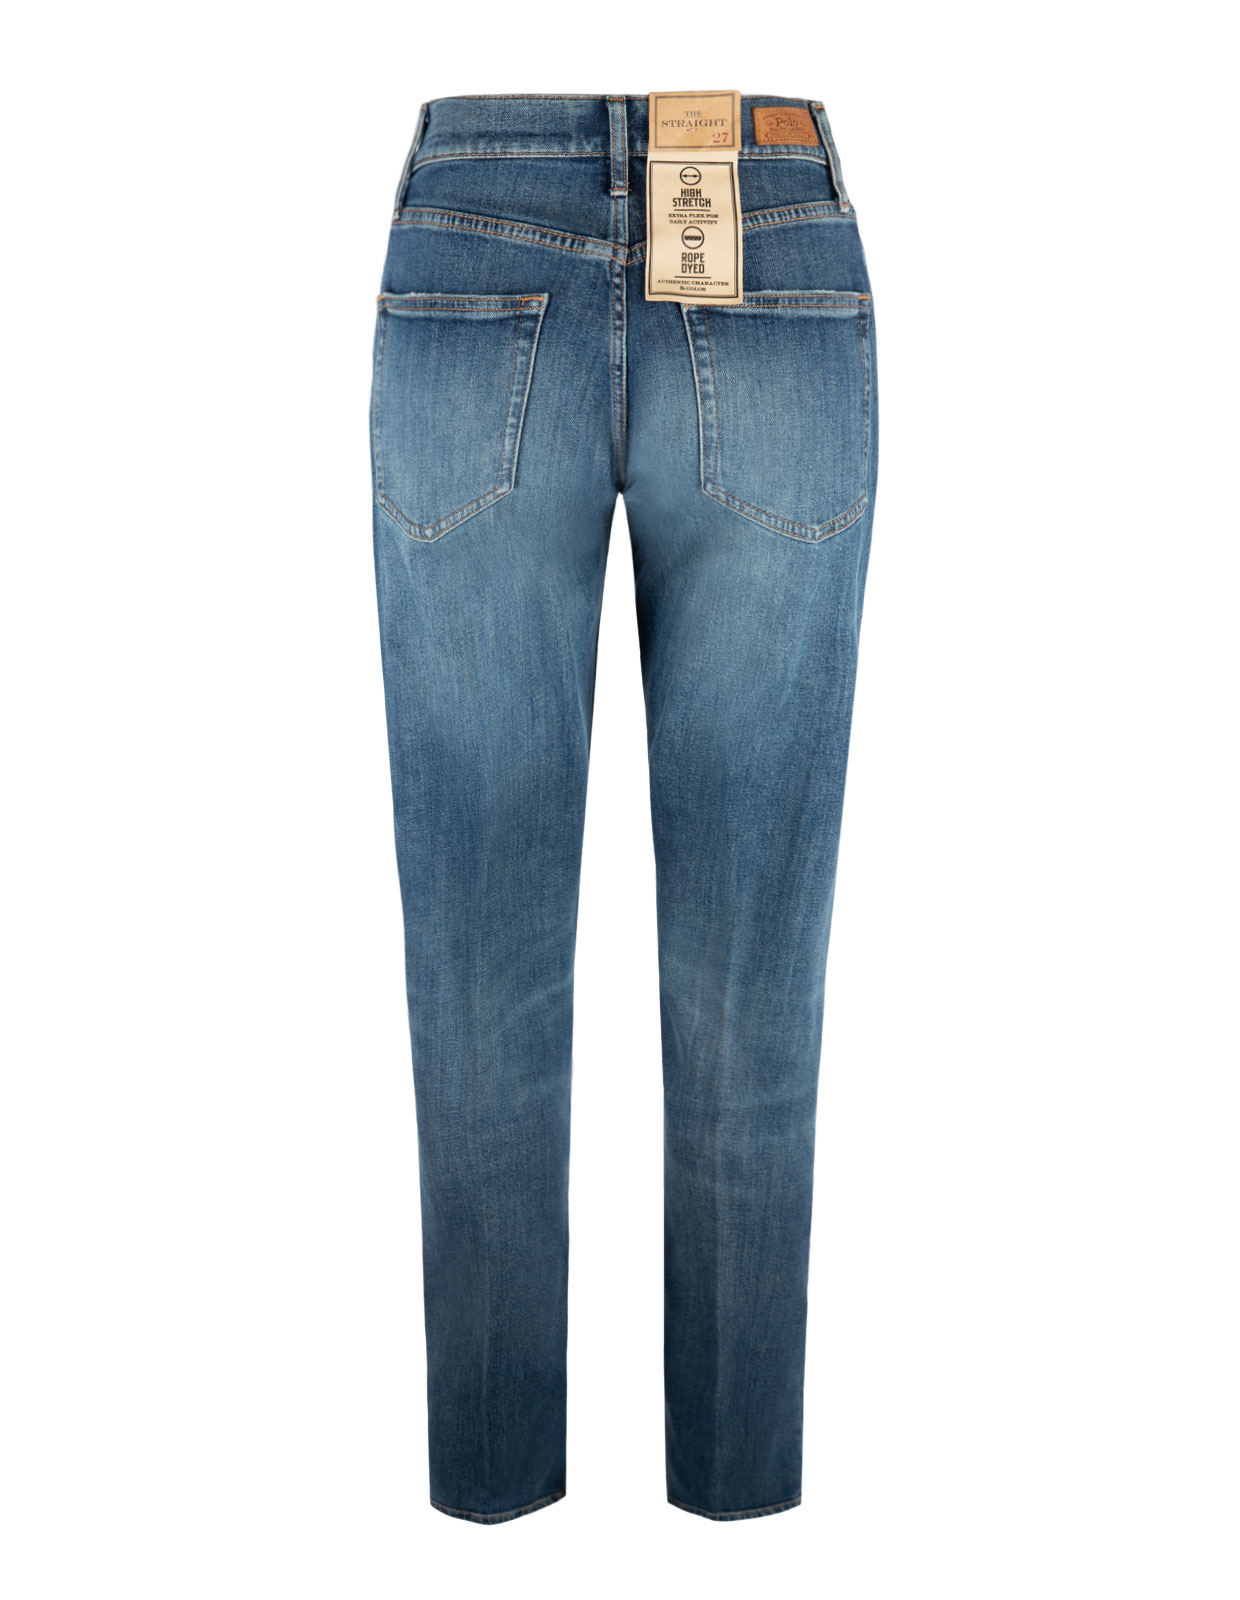 Straight Full Lenght Jeans Ruano Wash